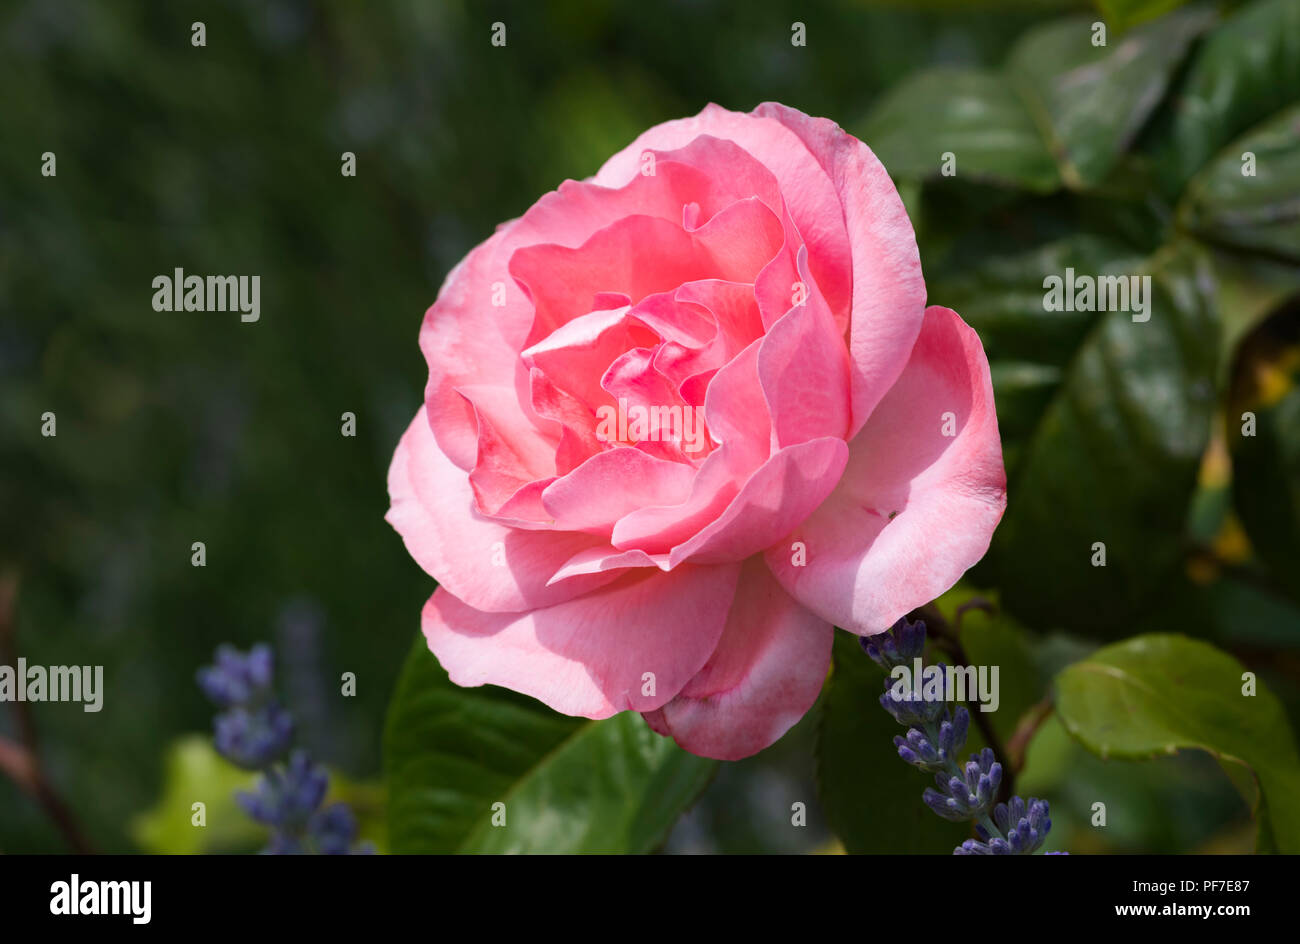 Closeup of a single pink rose (Rosa) in July in the UK. Stock Photo